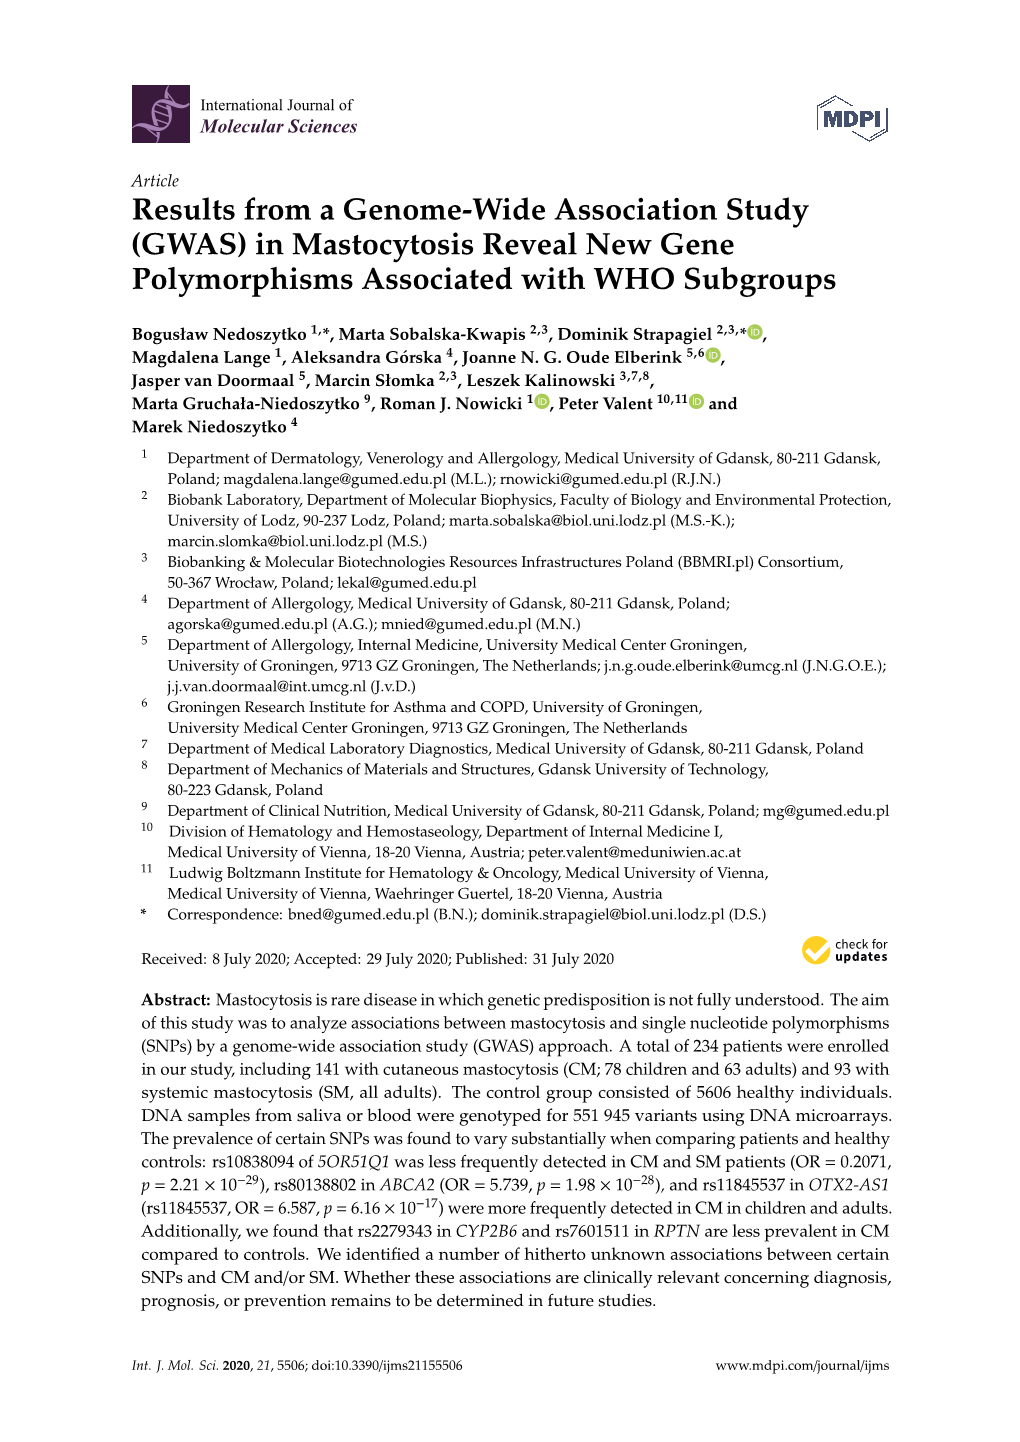 Results from a Genome-Wide Association Study (GWAS) in Mastocytosis Reveal New Gene Polymorphisms Associated with WHO Subgroups